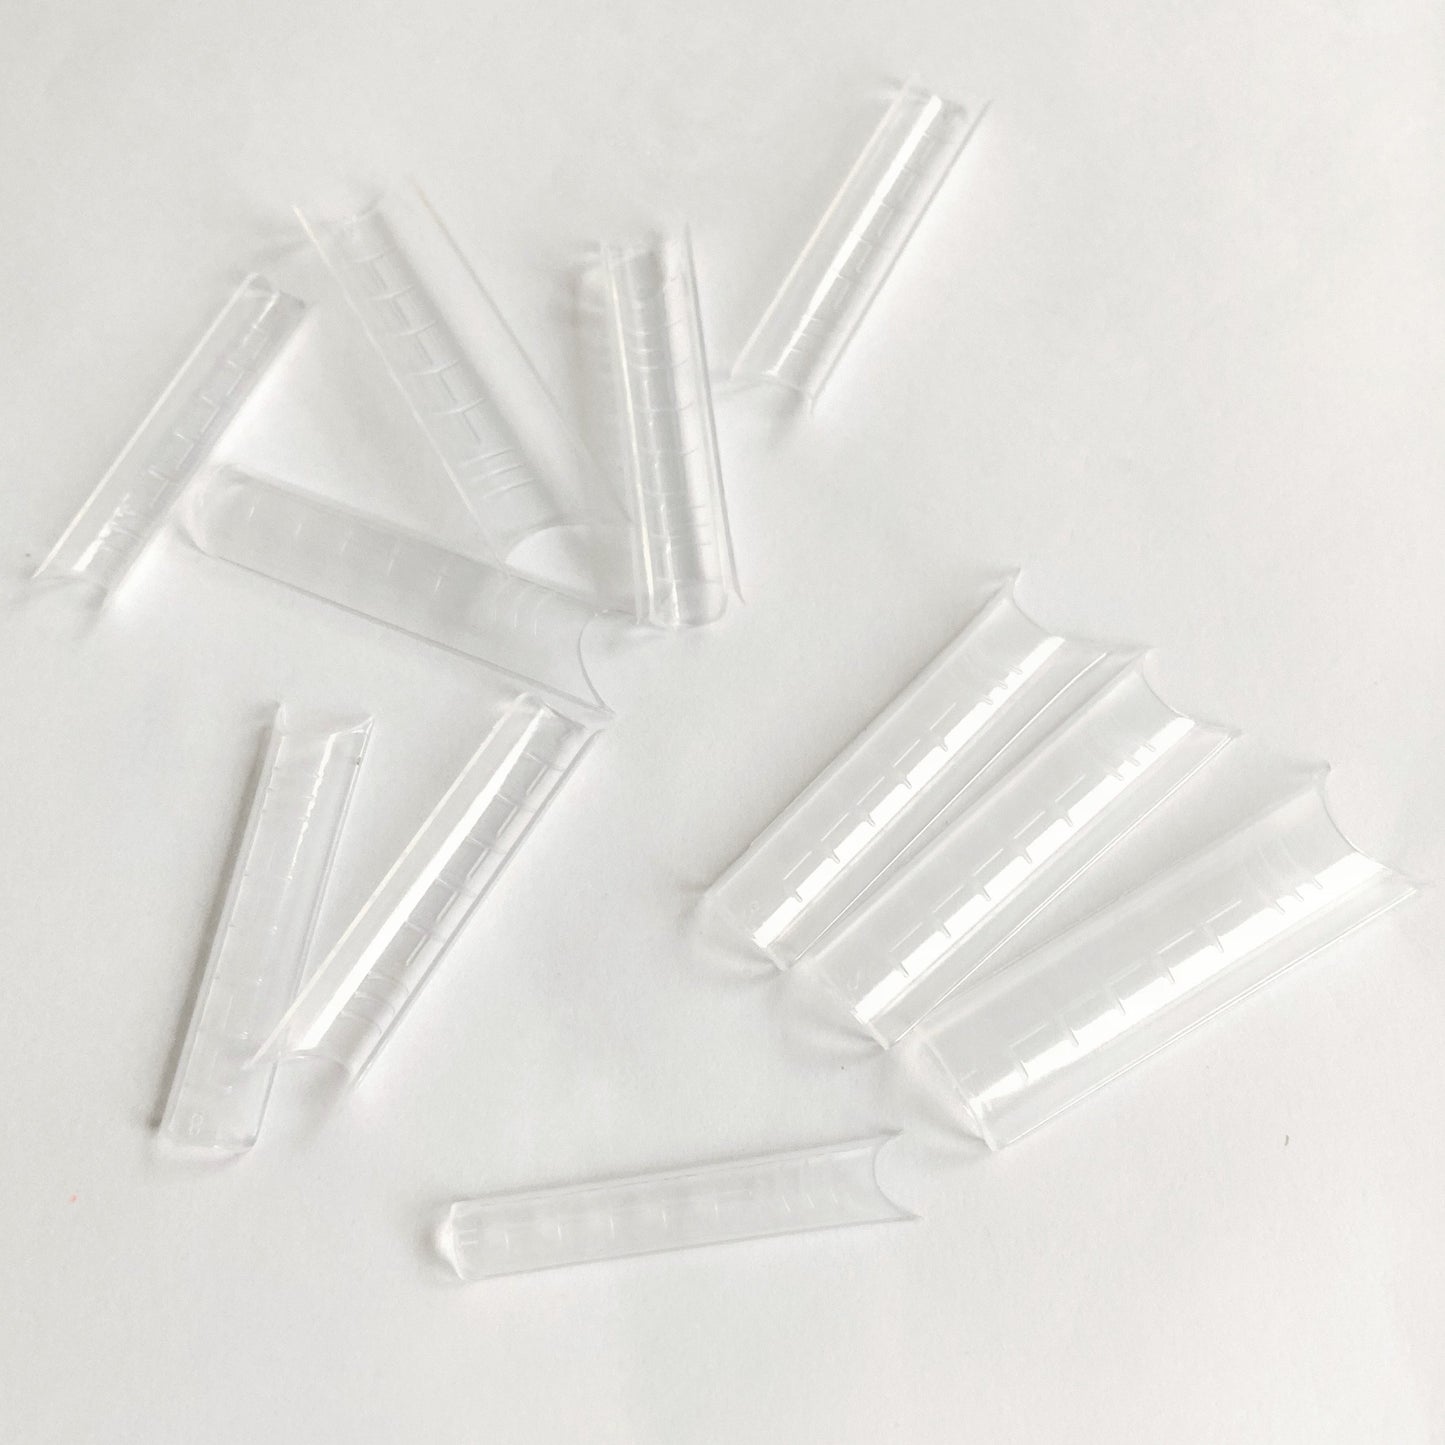 Dual Nail Forms #2 clear for acrygel, polygel, 120 pc